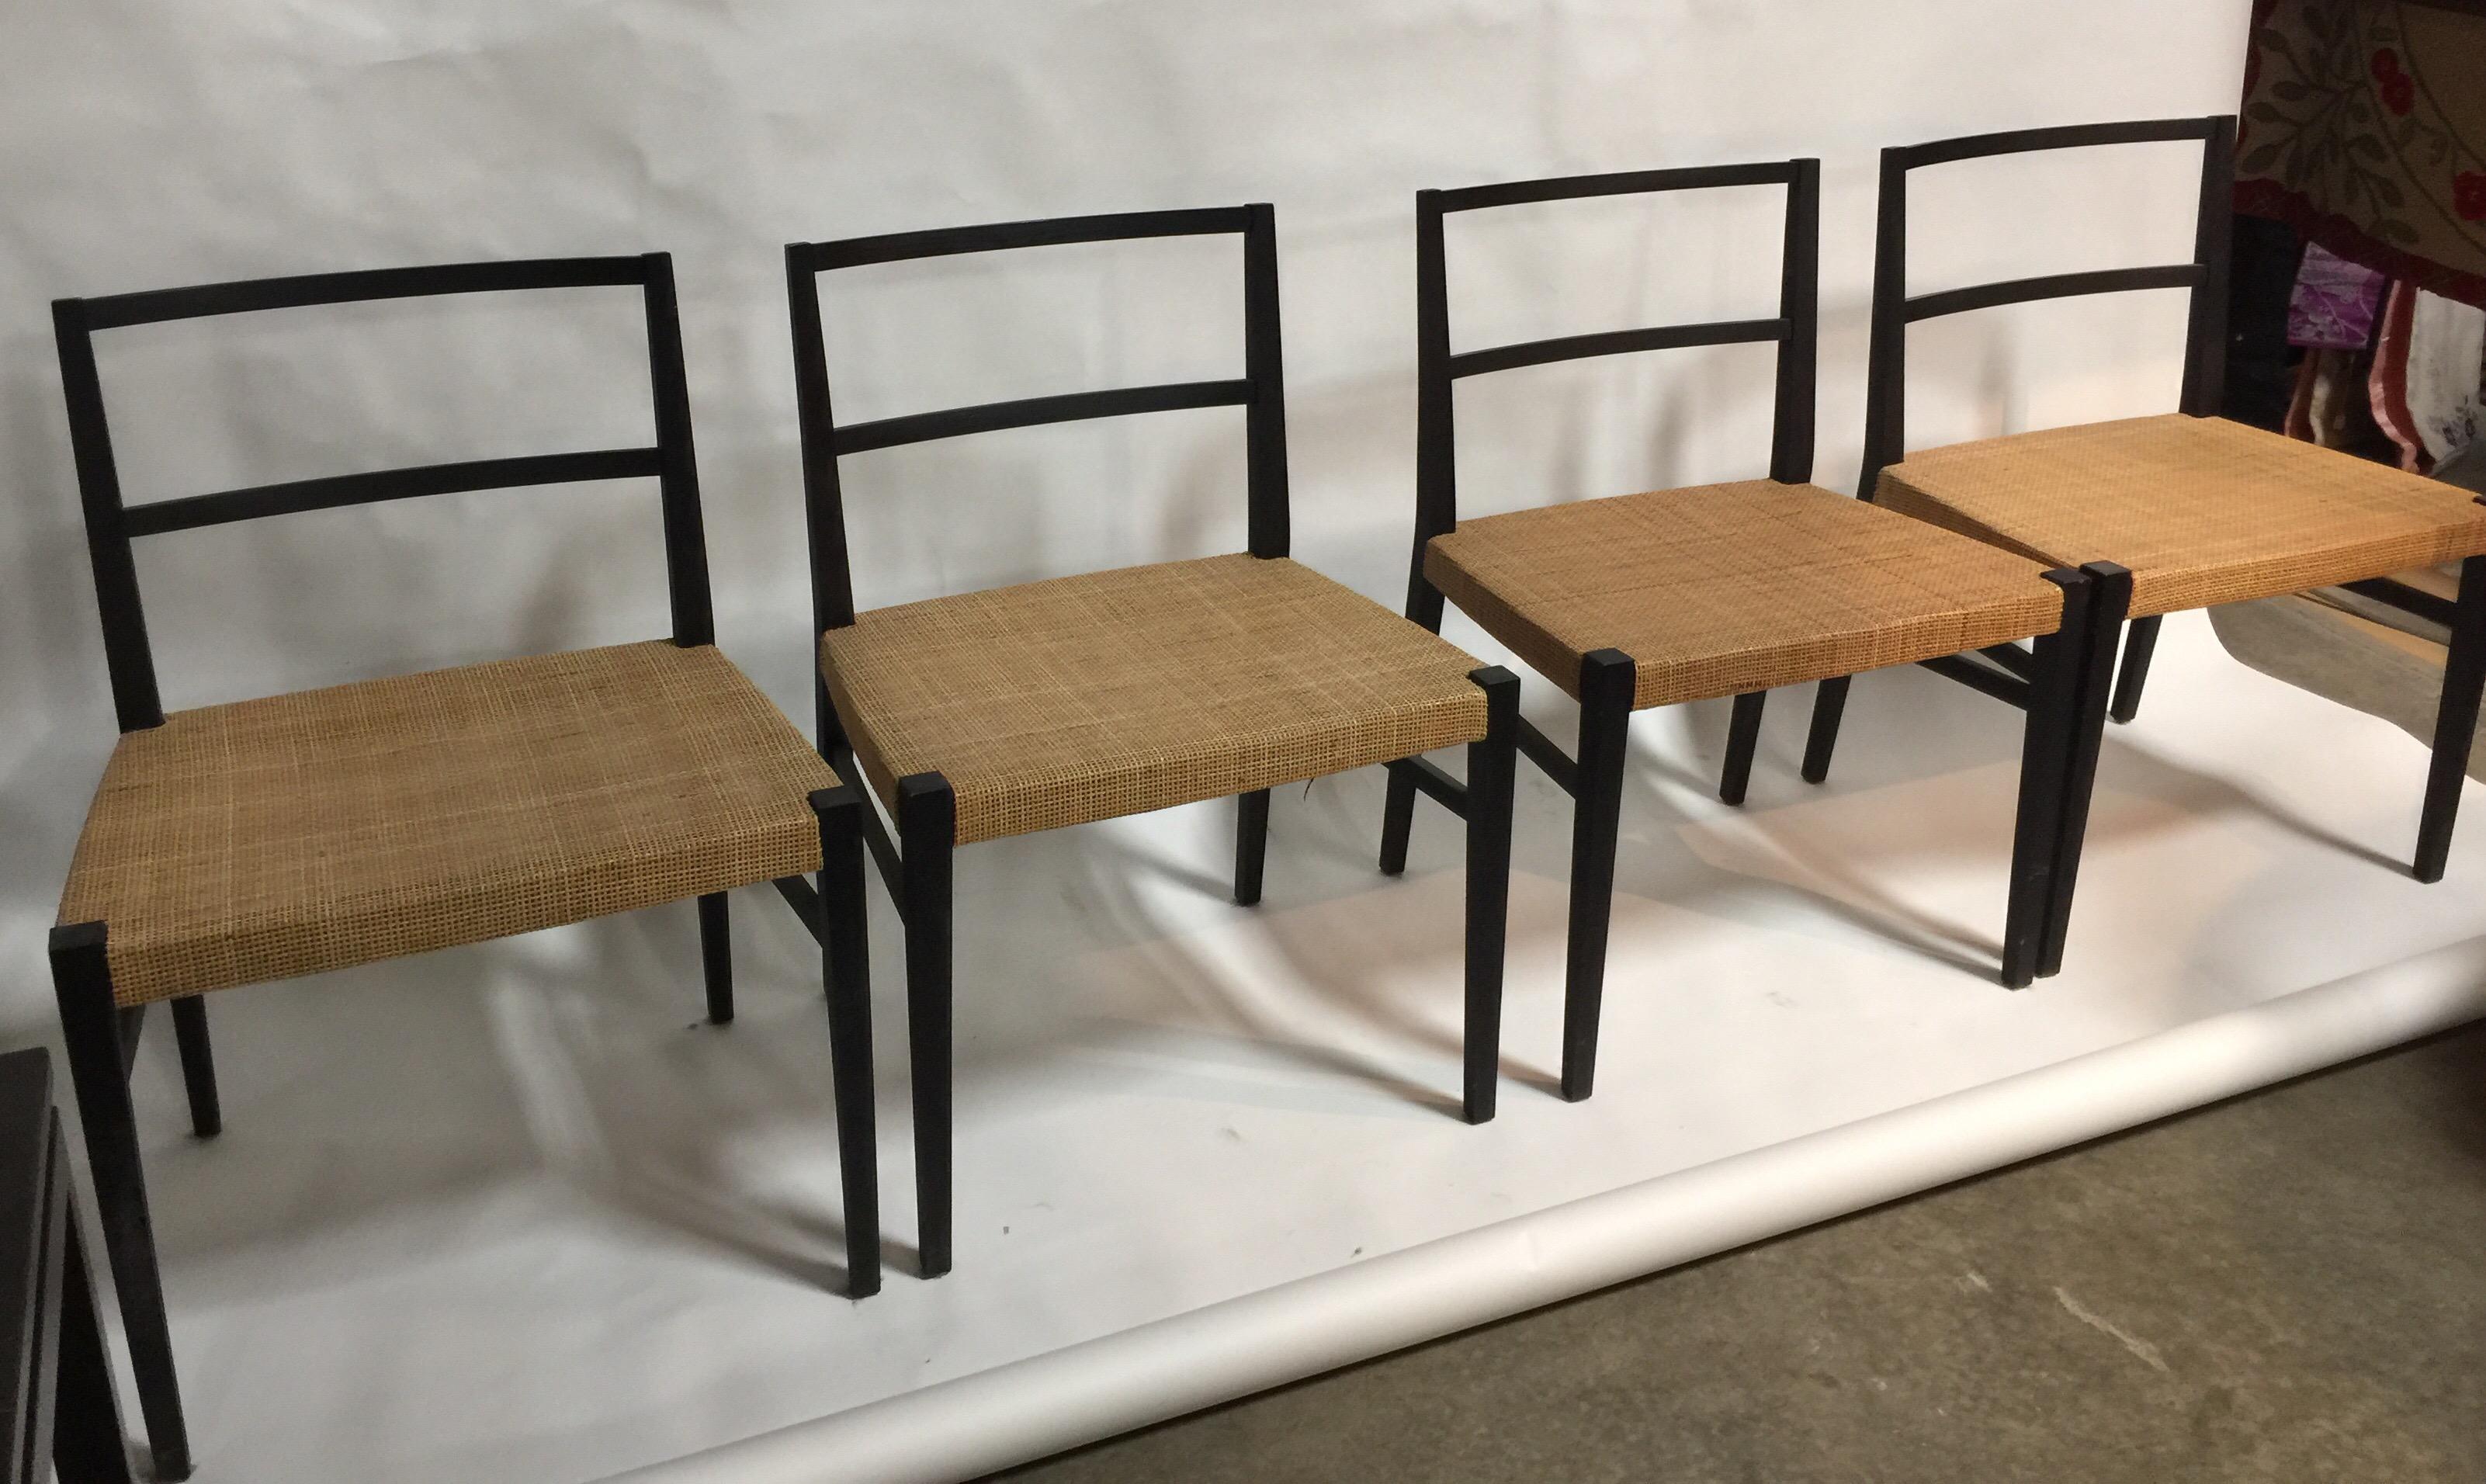 A set of 10 (ten) ebonized wood dining chairs with cane seats by Cappellini, Italy, circa 2000. Signed with paper label to underside of each chair. 
Originally ordered from Cappellini for an East Hampton, New York residence designed by Thom